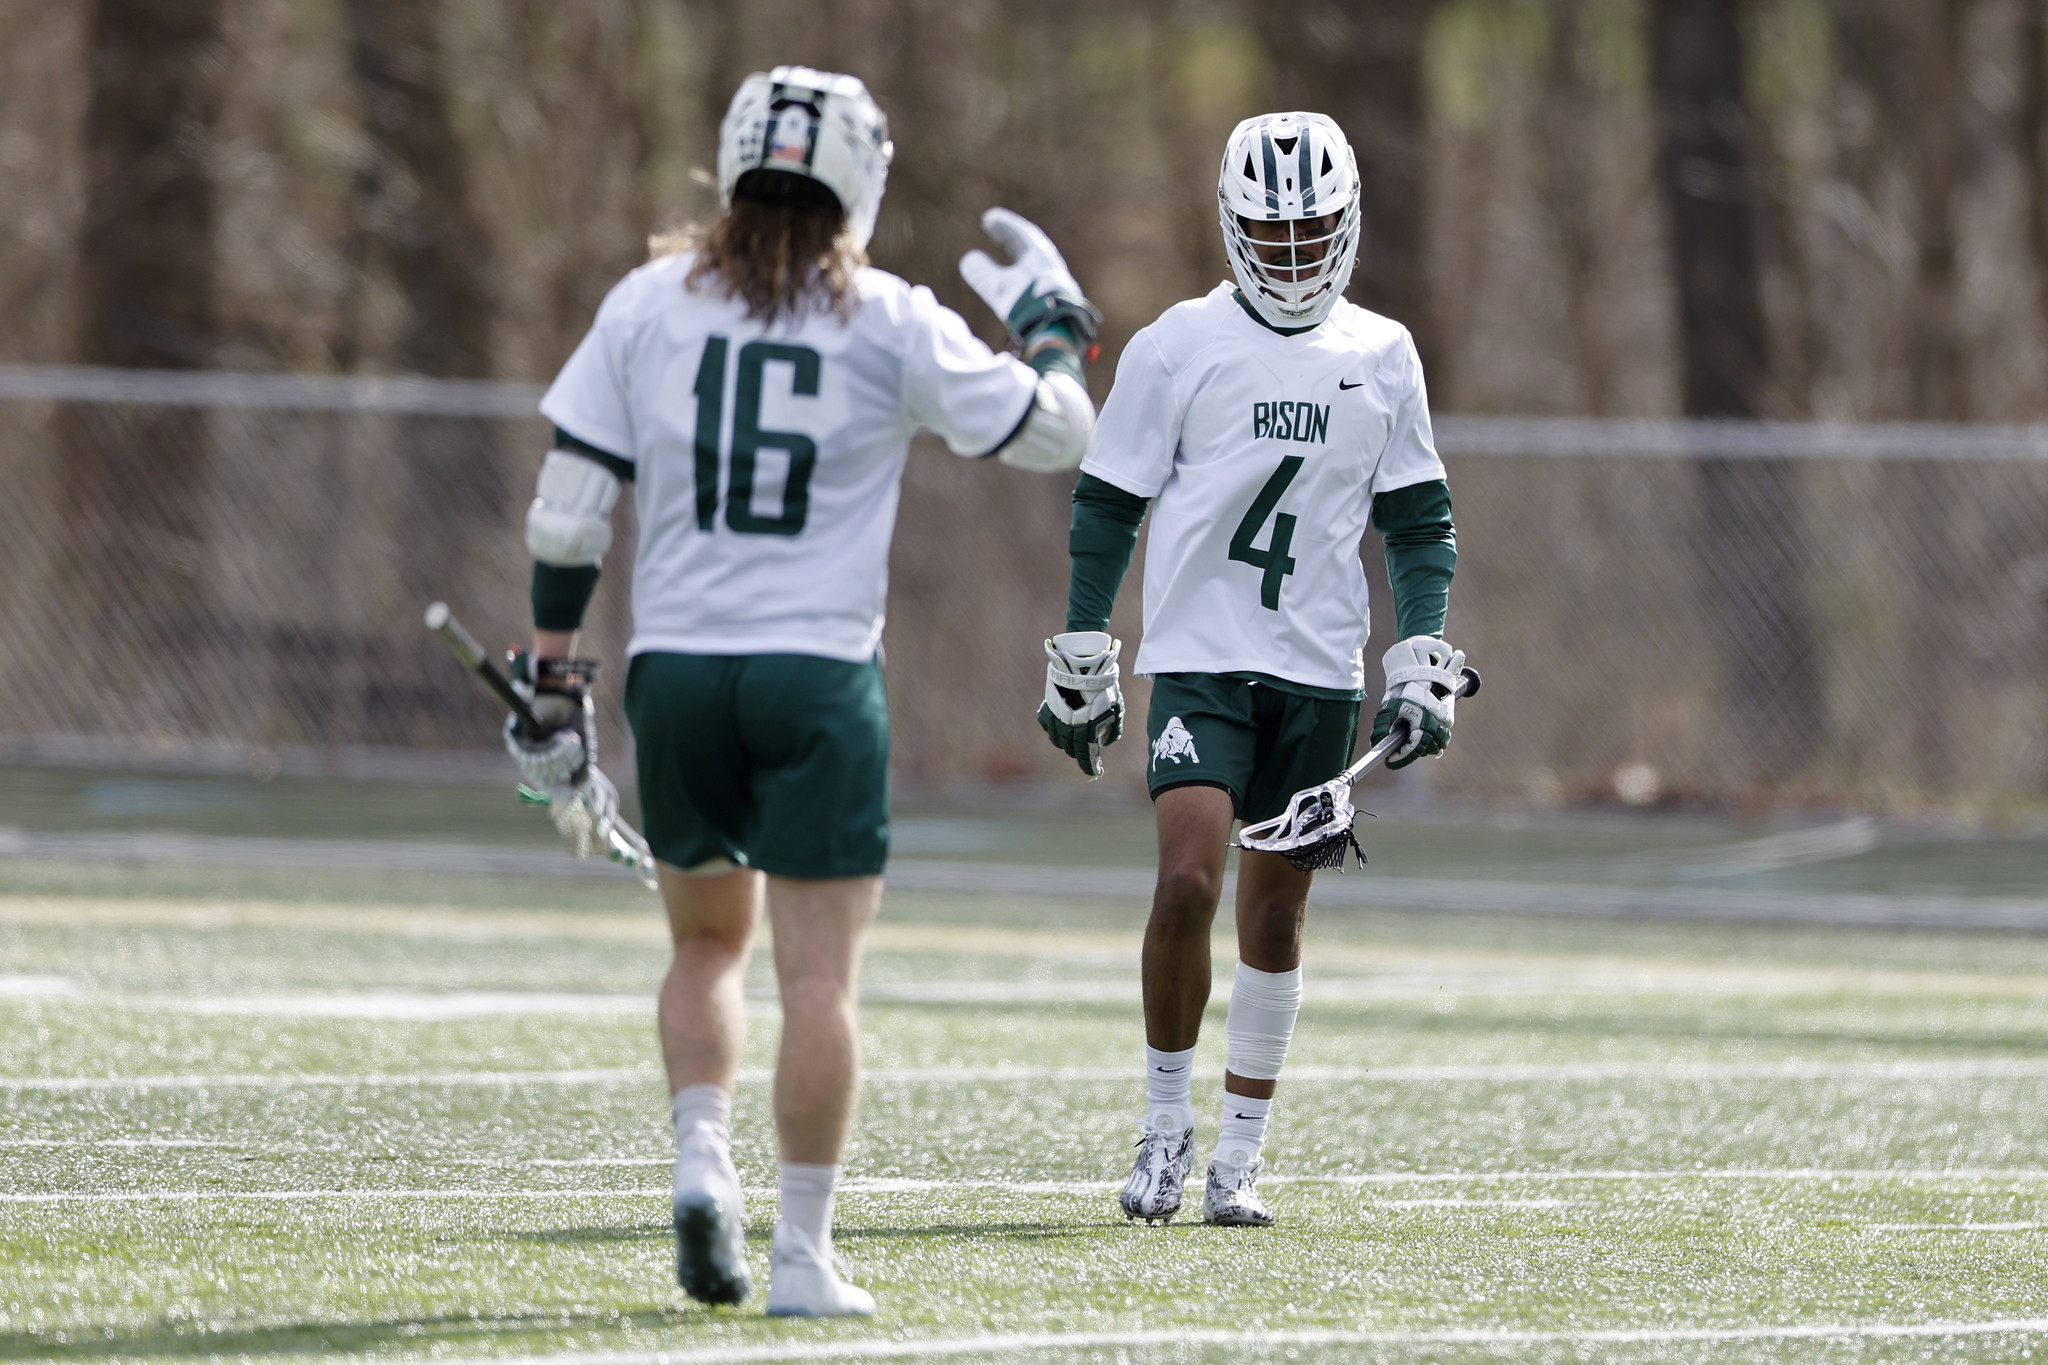 Men's Lacrosse: Bison Unable to Close Out Win